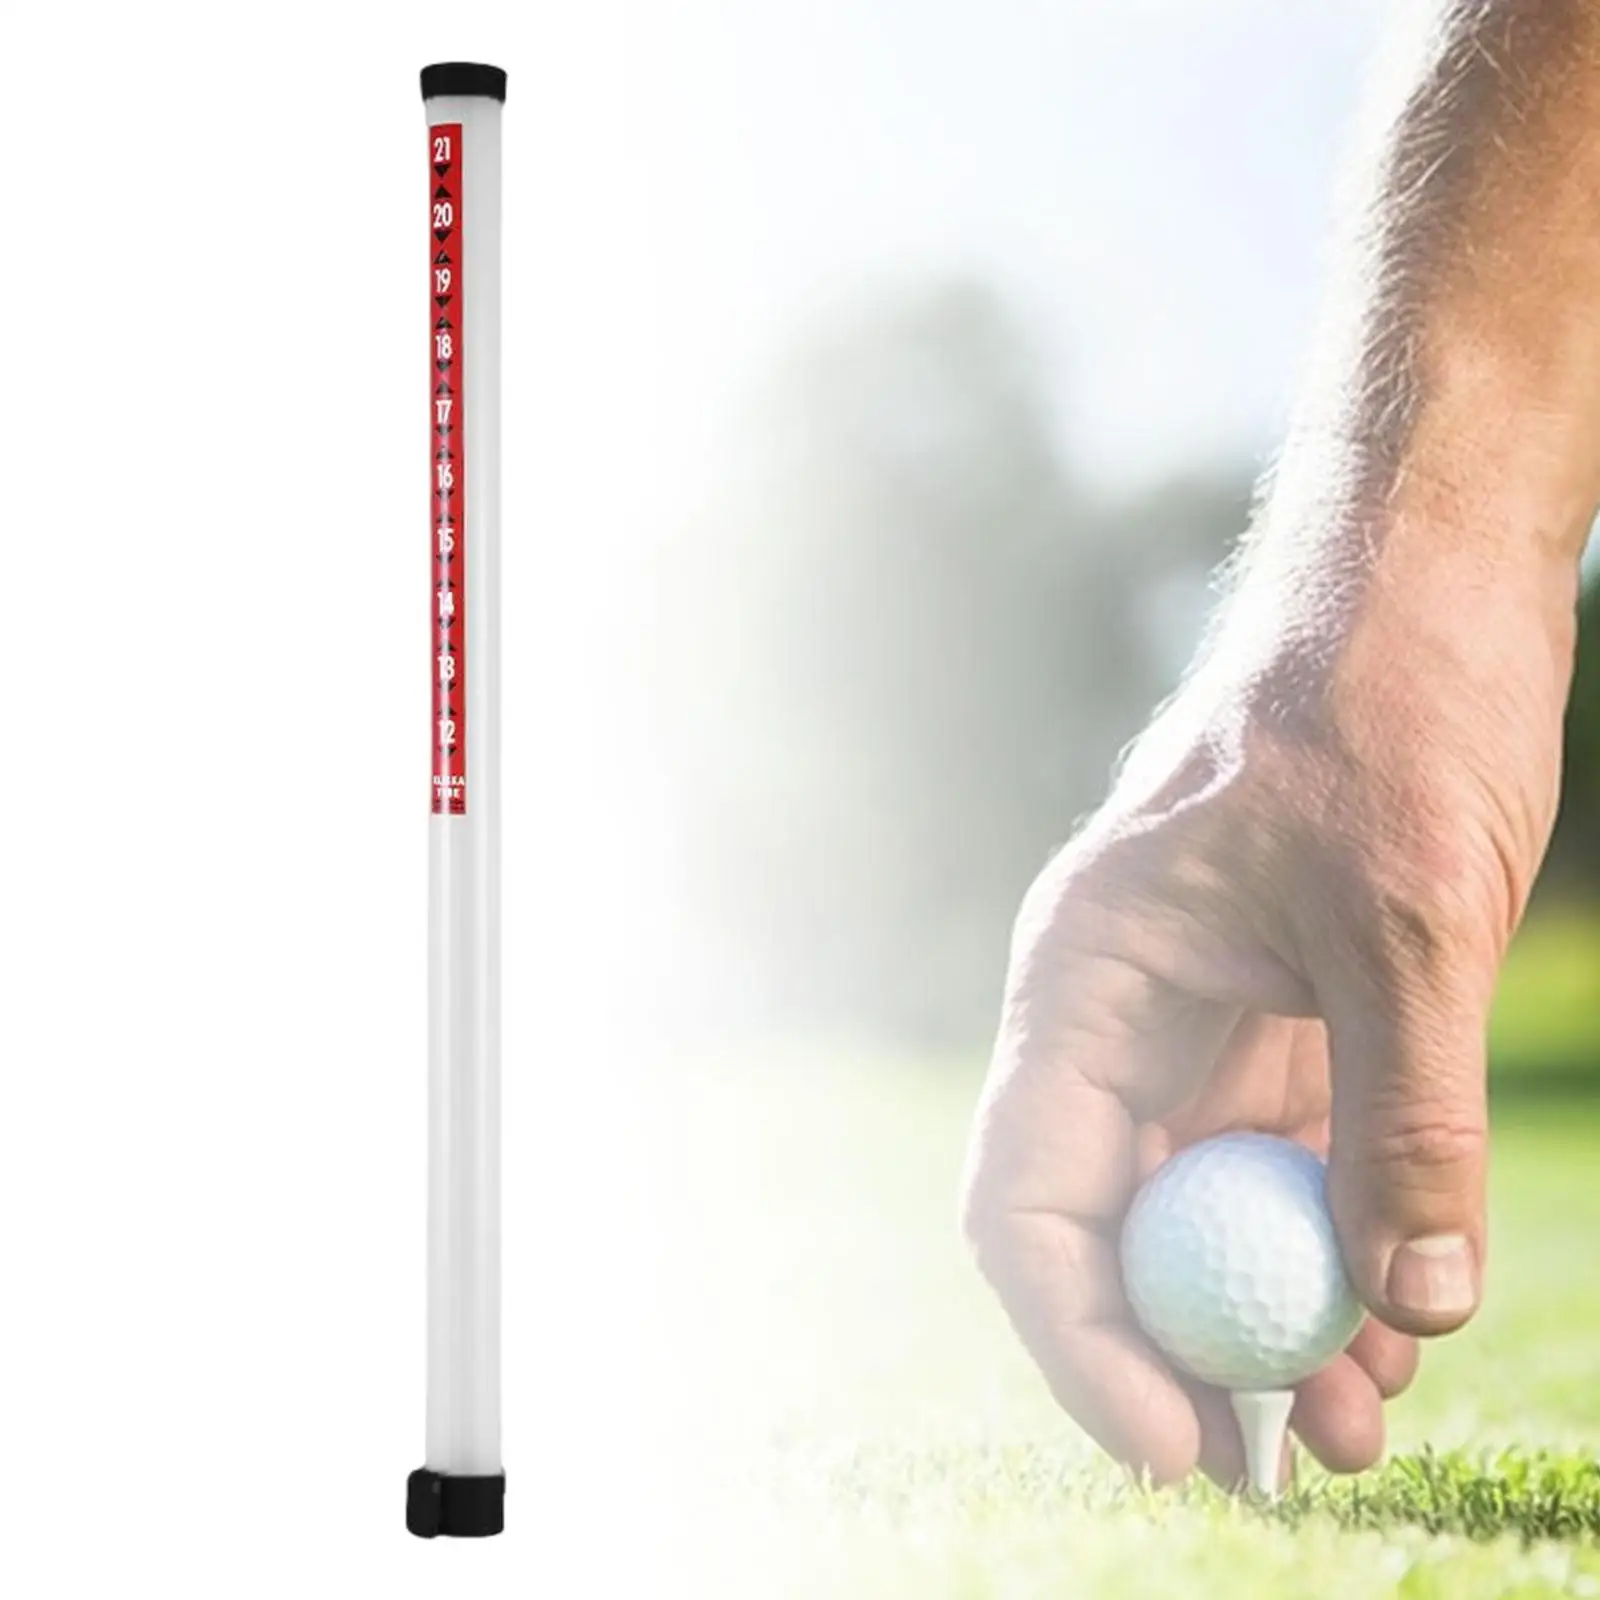 Golf Ball Retriever Pick up Sucker Tool with Foot Release Golf Accessories Golf Ball Shag Tube for Men Women Practice Training